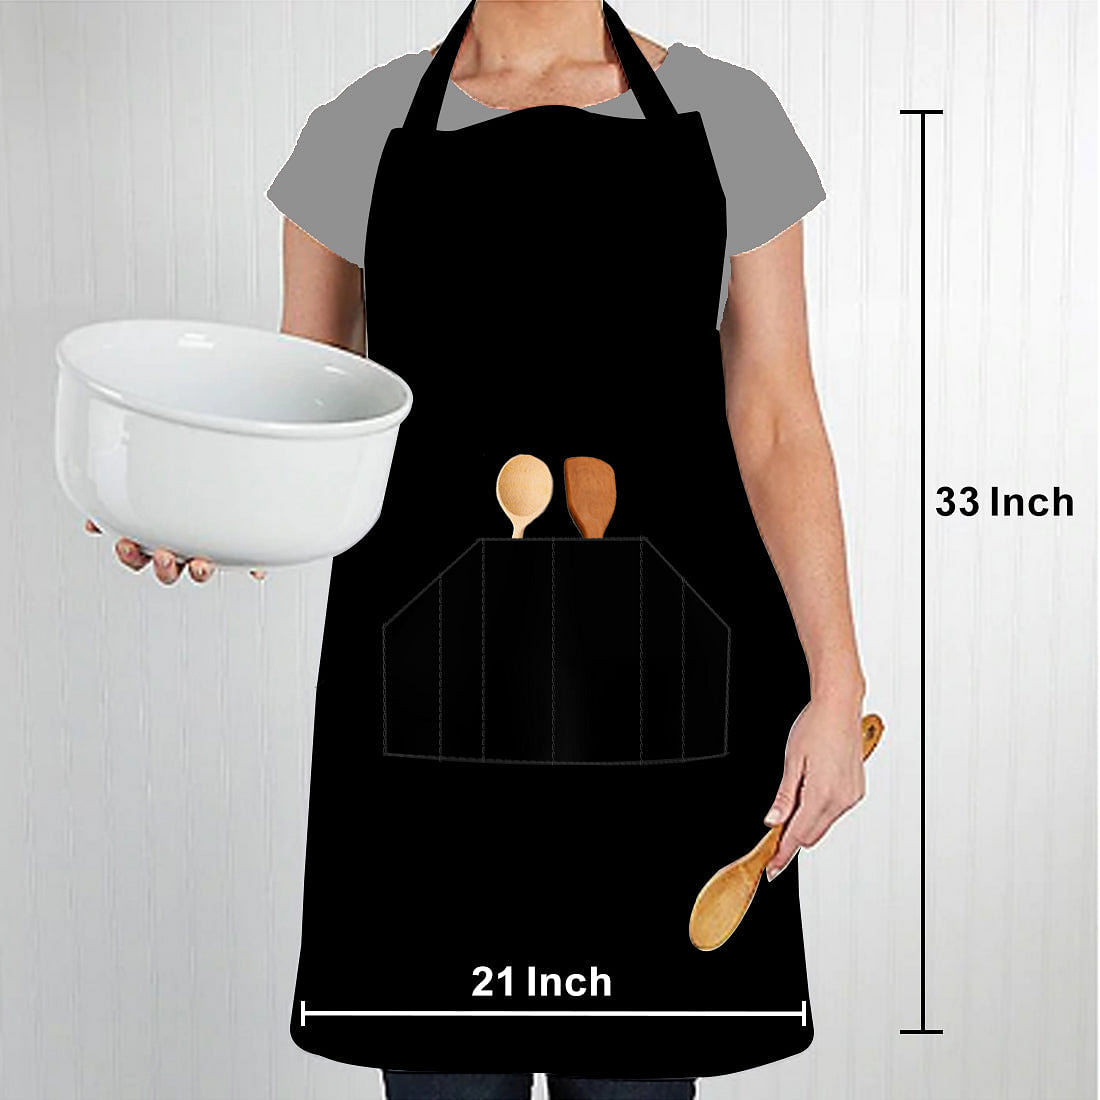 Personalised Cooking Apron with Name for Baking  - Add Name Nutcase